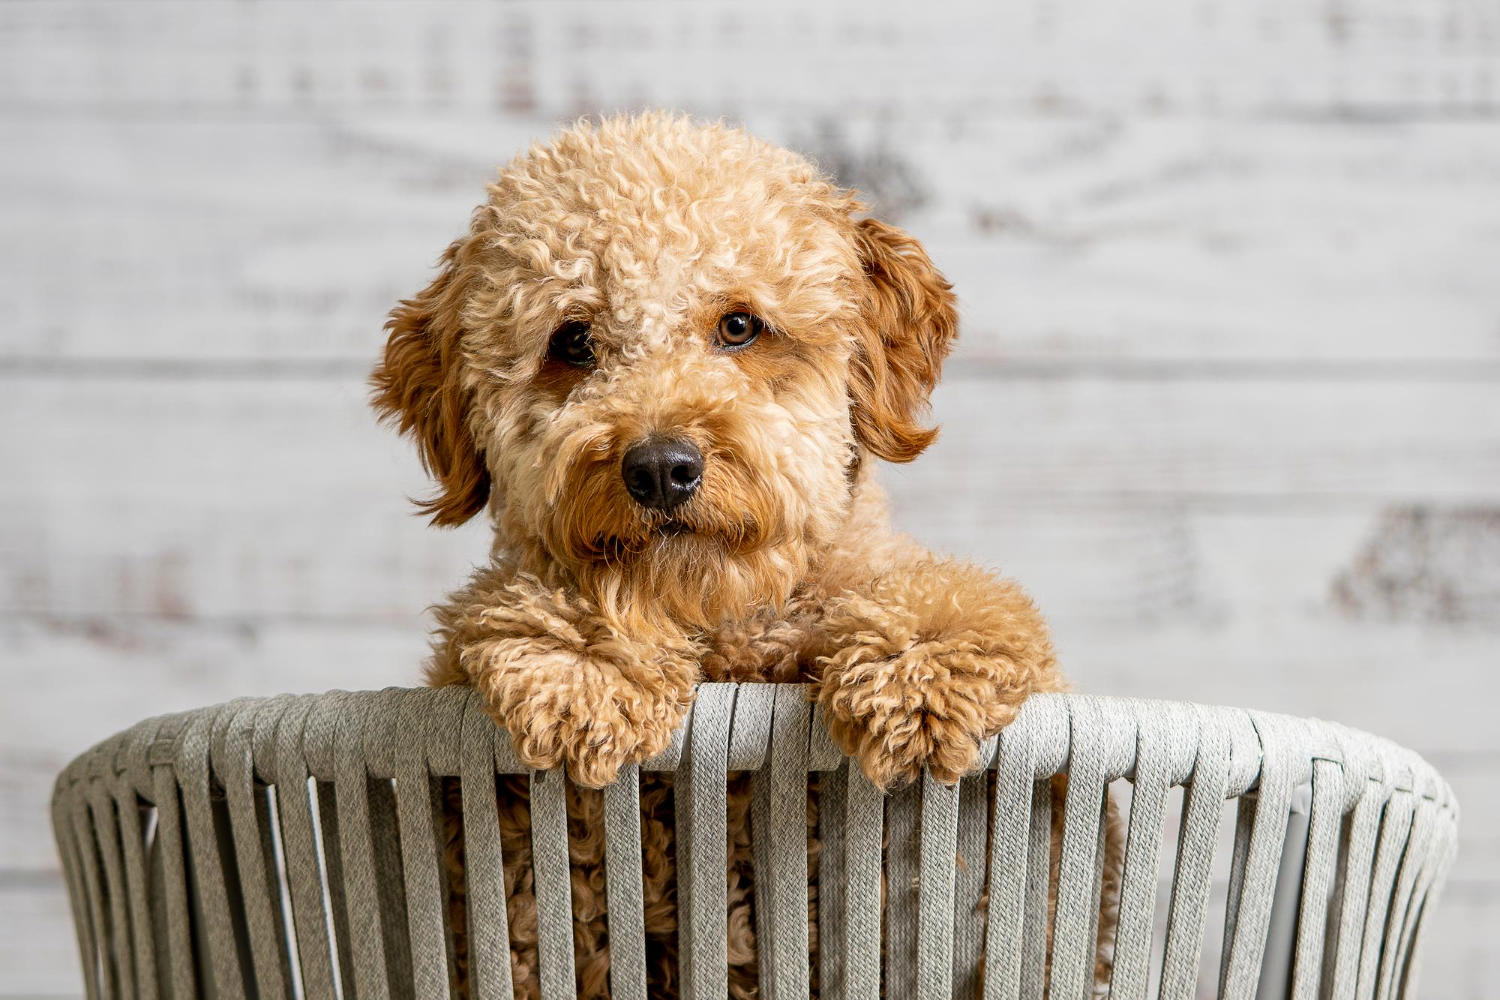 "The Ultimate Guide to Feeding Your Goldendoodle: What to Feed and What to Avoid"